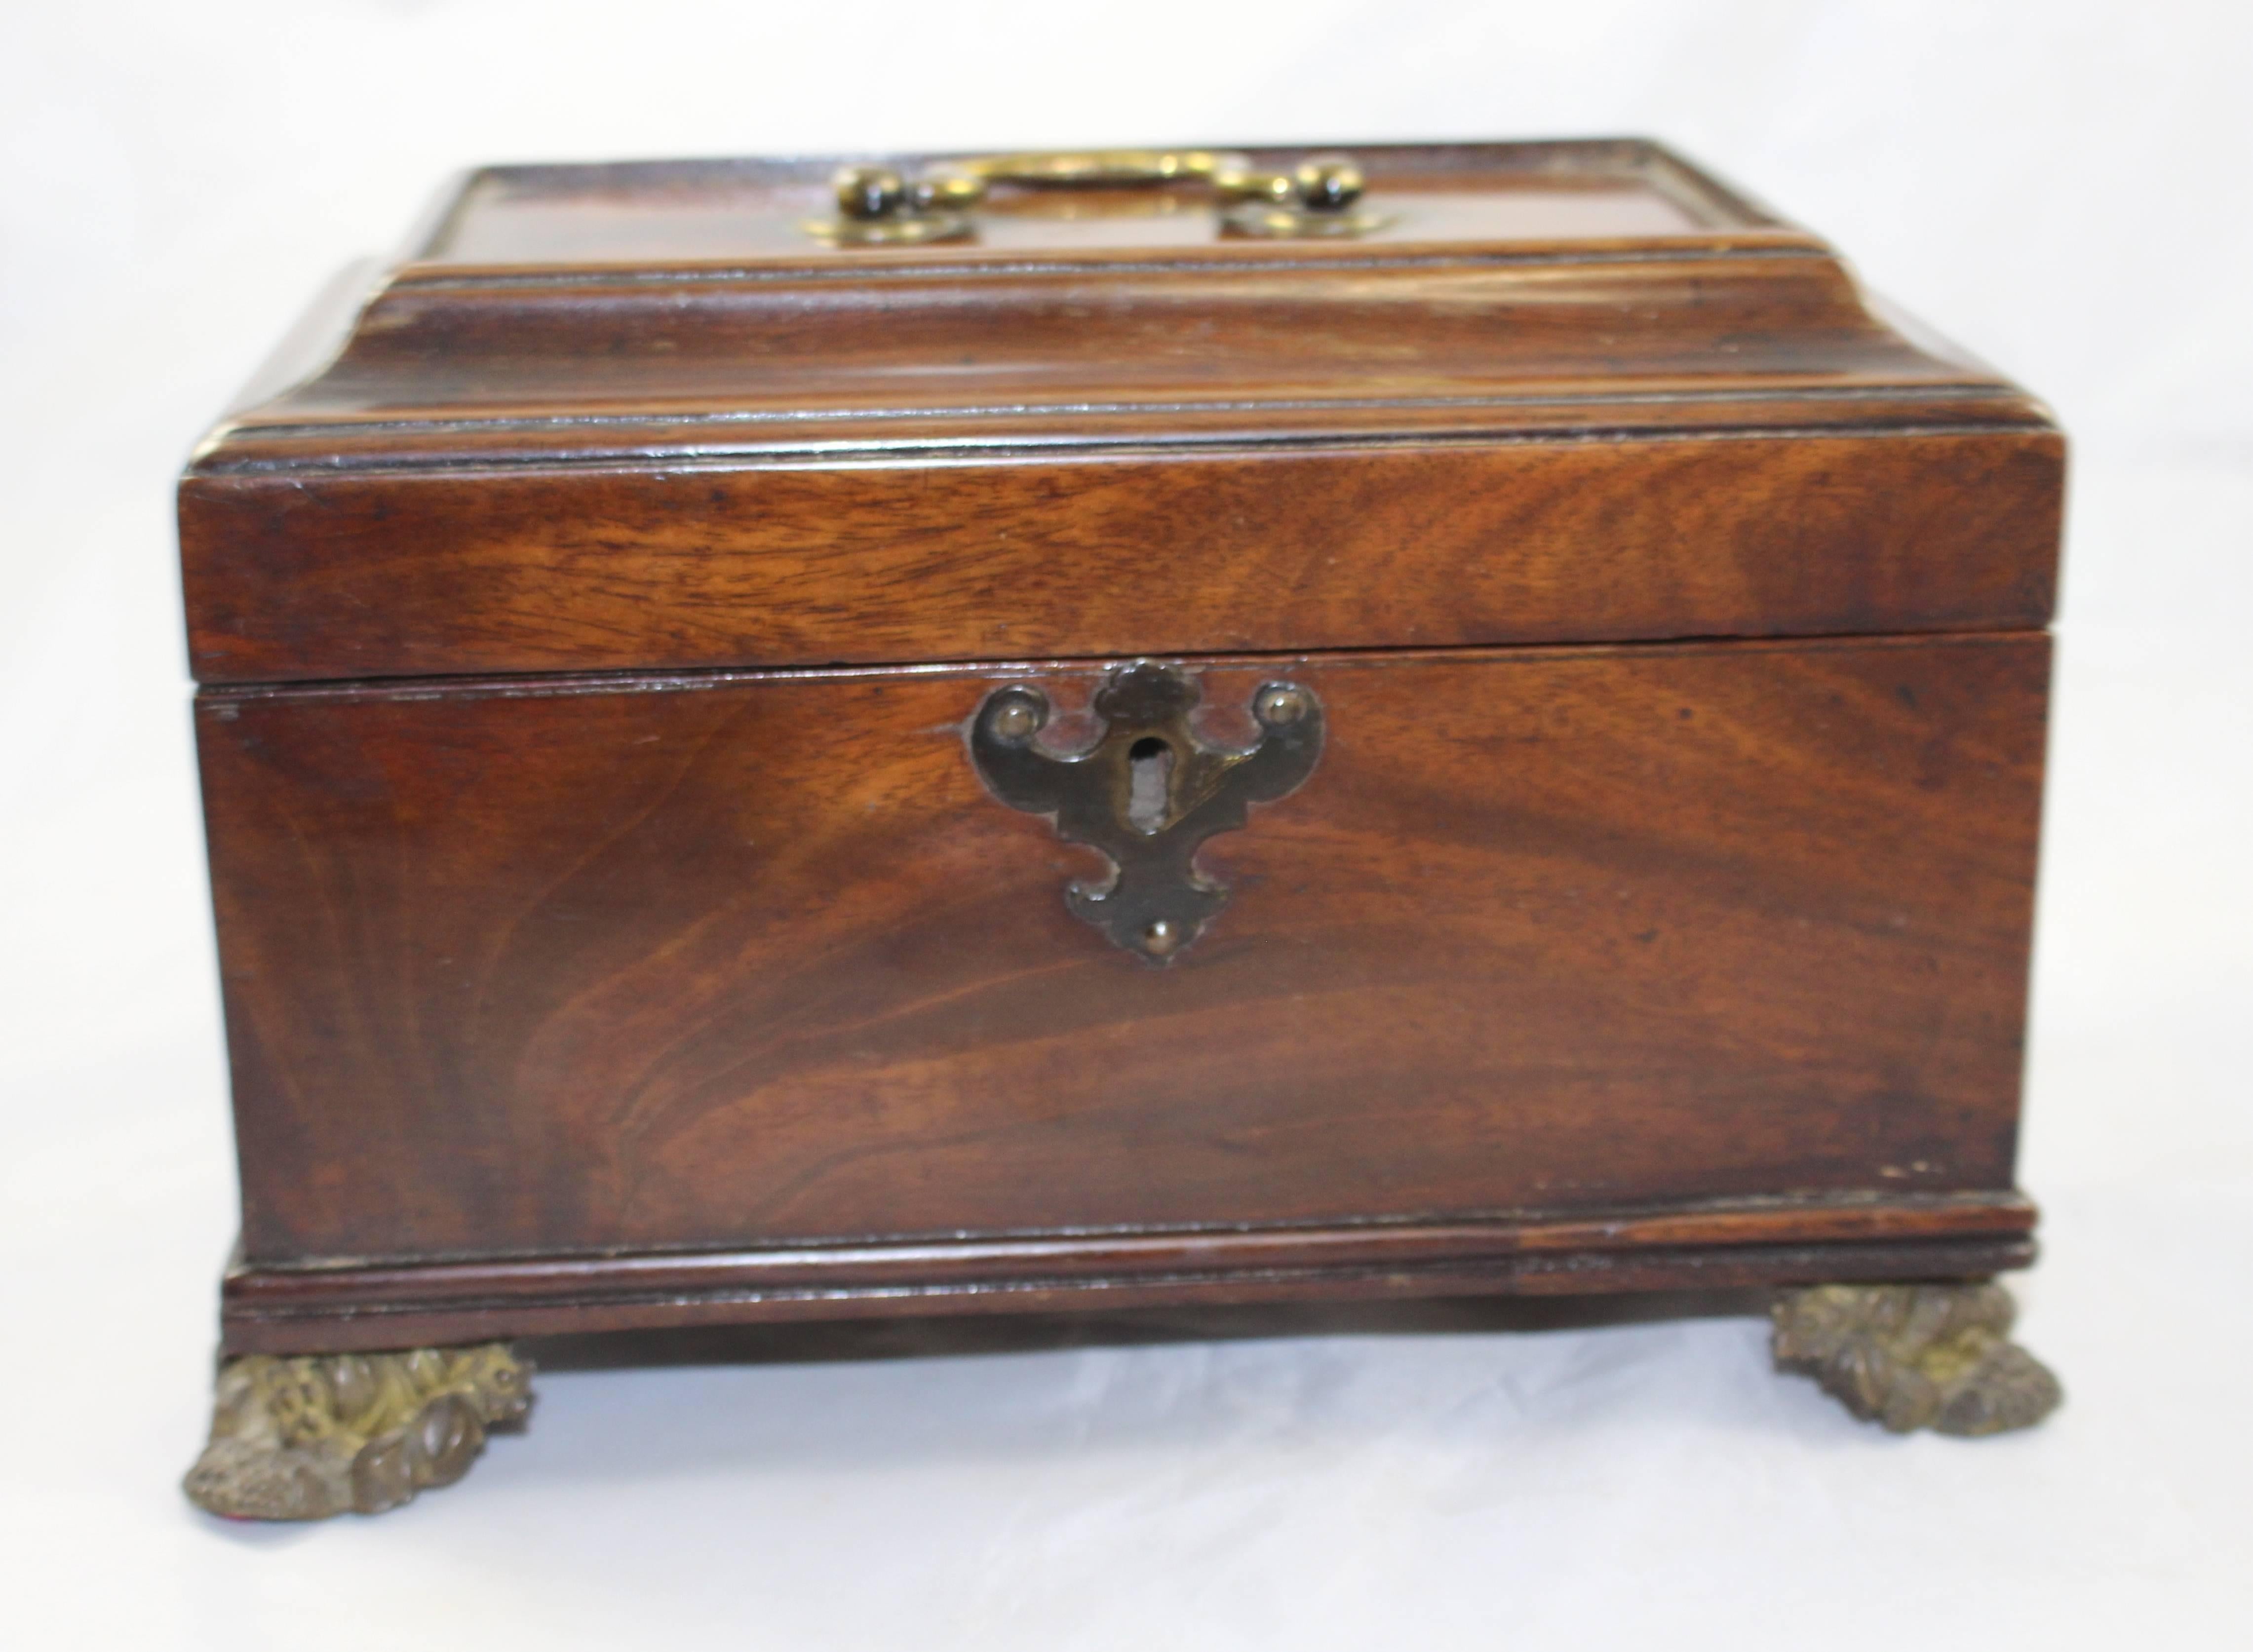 Period Georgian.
Wood mahogany.
Width 25 cm / 9 3/4 in.
Depth 15 cm / 6 in.
Height 16 cm / 6 1/4 in.
Condition good condition. Some marks commensurate with age. Very sturdy.

Fine quality period box of desirable size.

Mahogany with